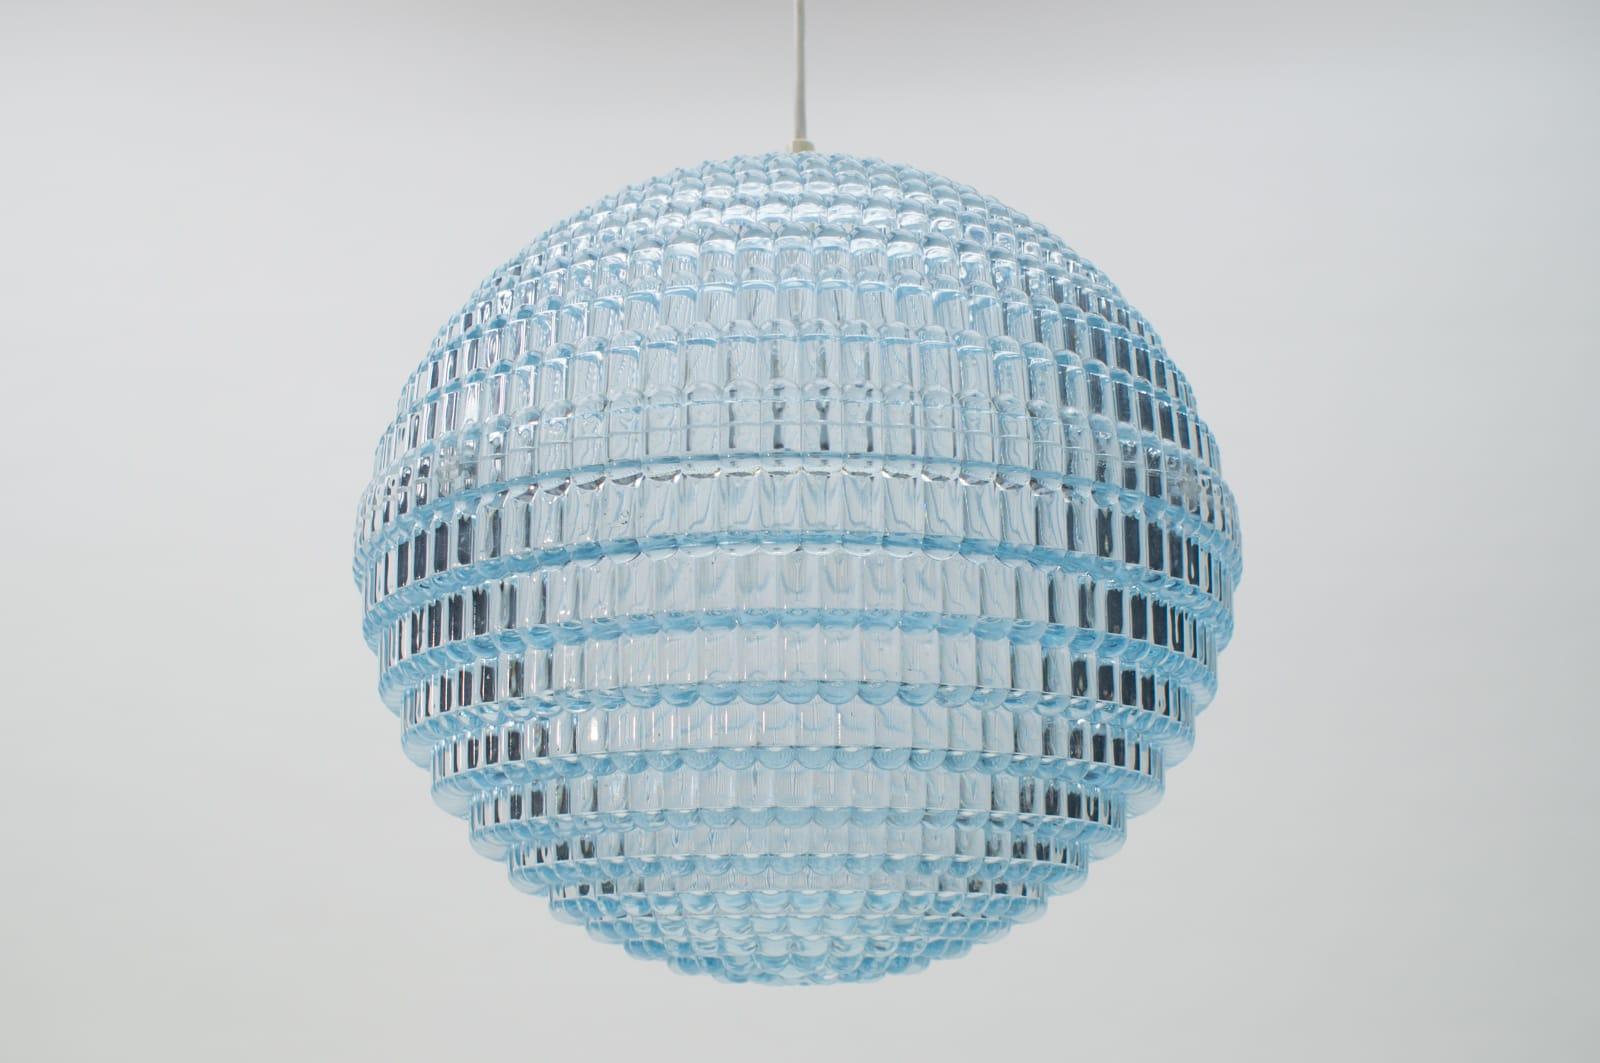 Rare Ceiling Geometric Lamp by Aloys F. Gangkofner for Erco Leuchten, 1960 In Good Condition For Sale In Nürnberg, Bayern